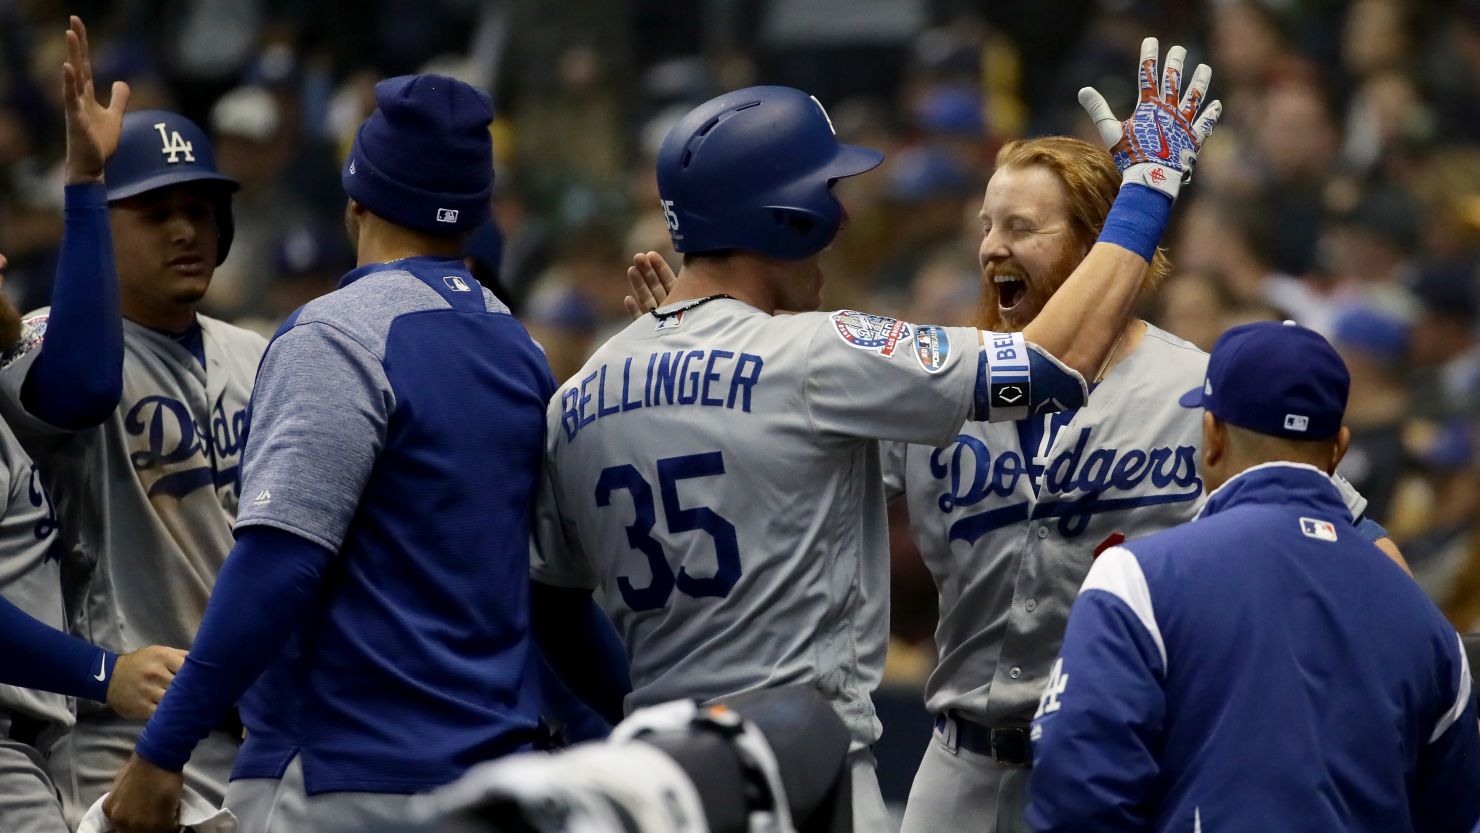 Cody Bellinger, No. 35 of the Los Angeles Dodgers, celebrates with his teammates after hitting a two-run home run Saturday night as the Dodgers headed to a 5-1 win over the Milwaukee Brewers to win the National League Championship.